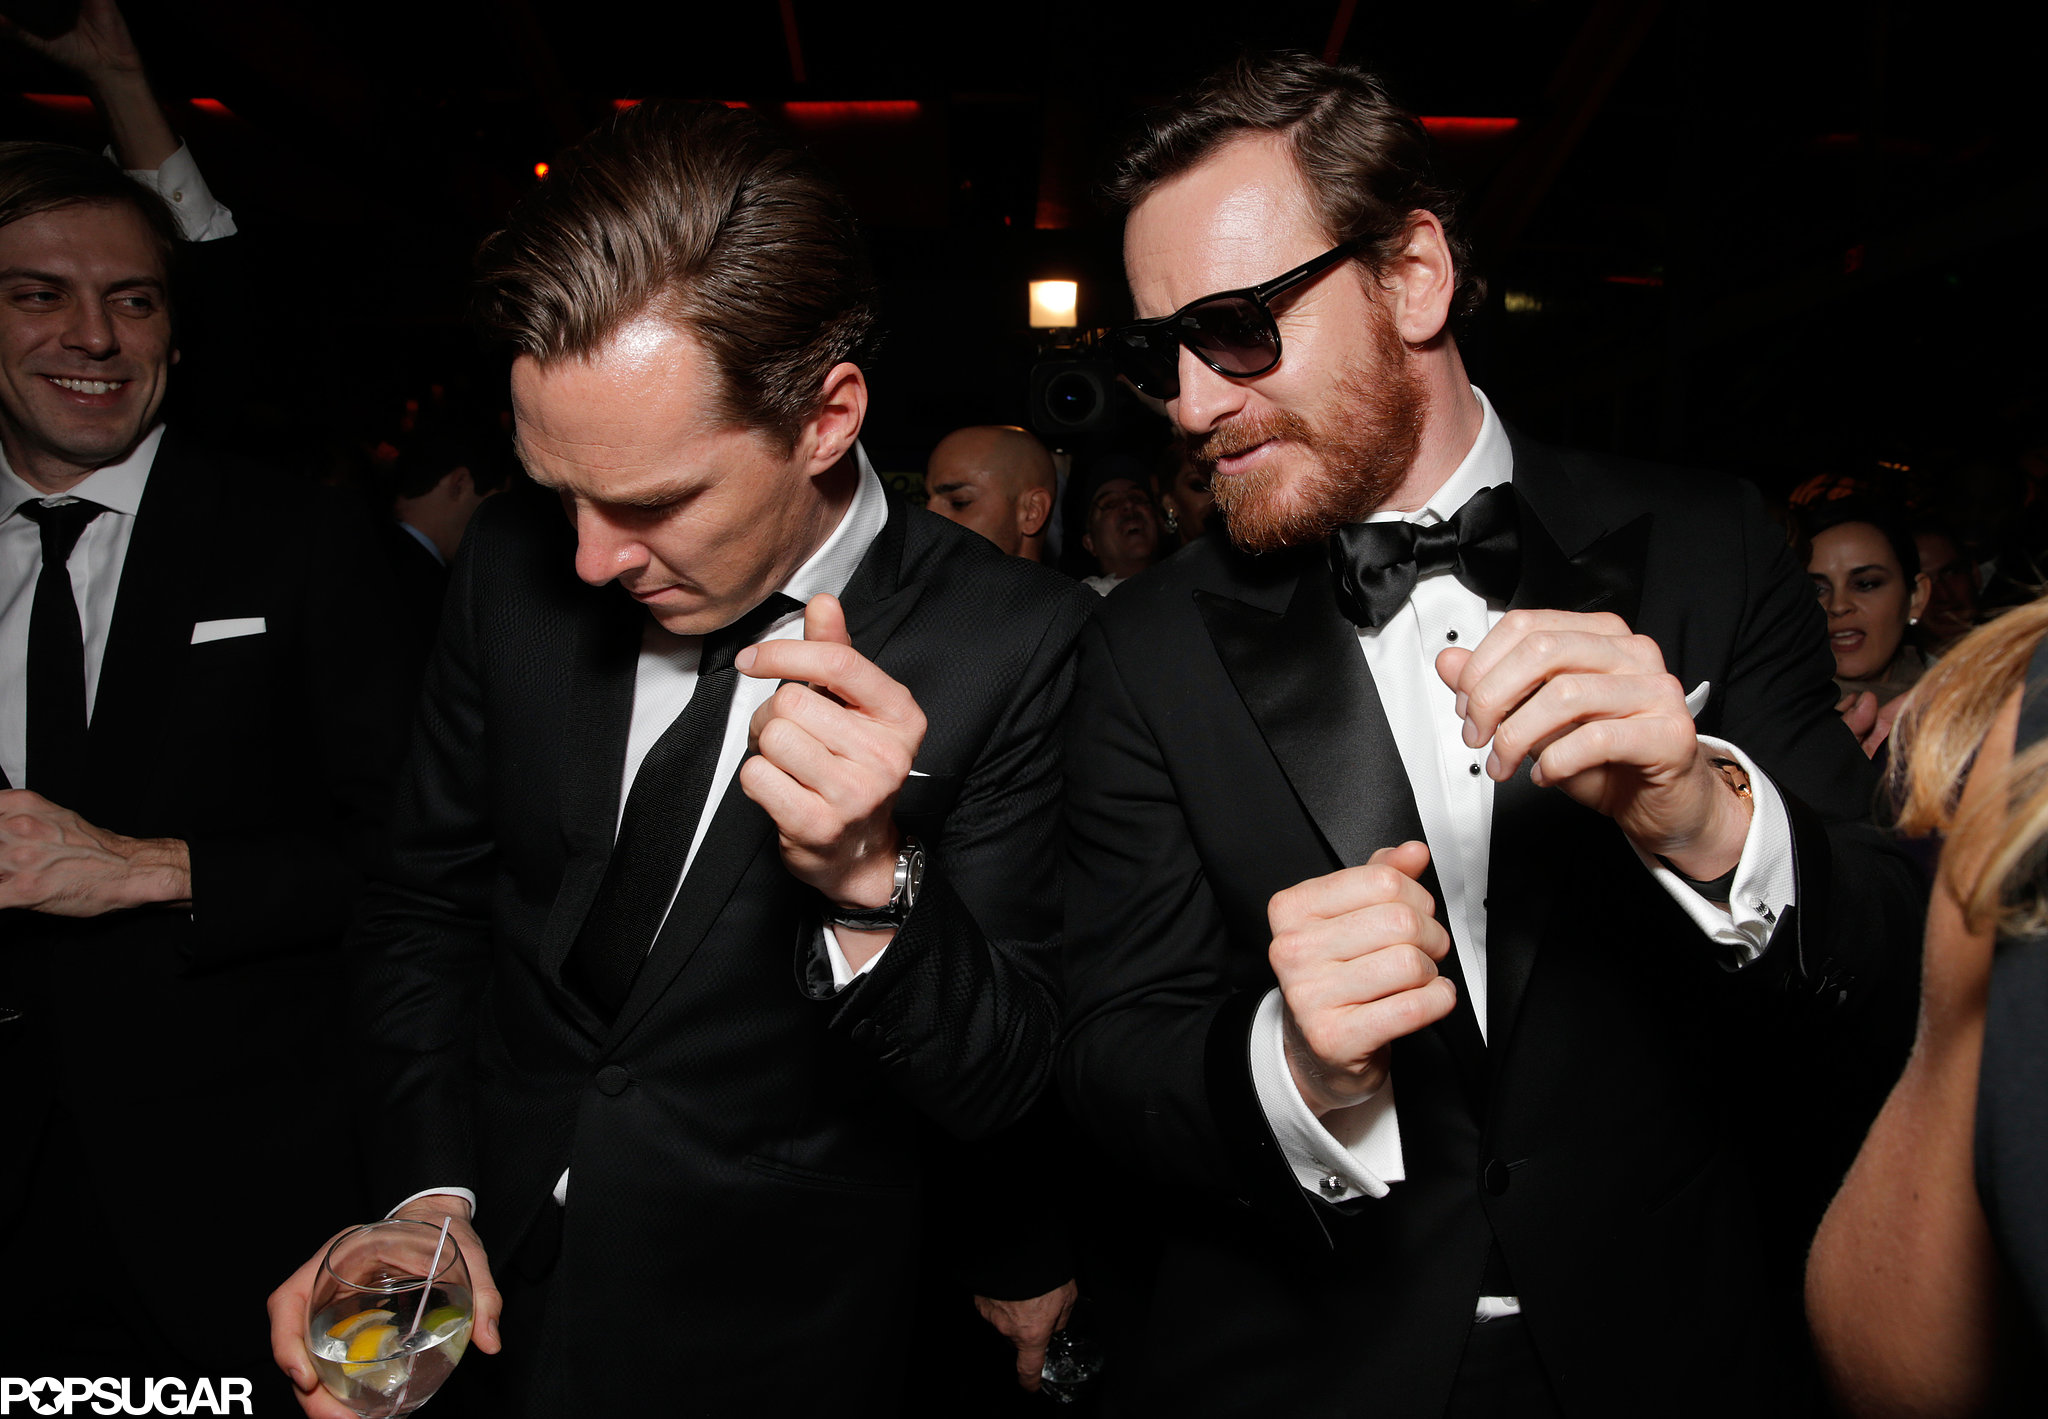 Benedict-Cumberbatch-got-his-groove-Michael-Fassbender-Fox-Golden-Globes-afterparty